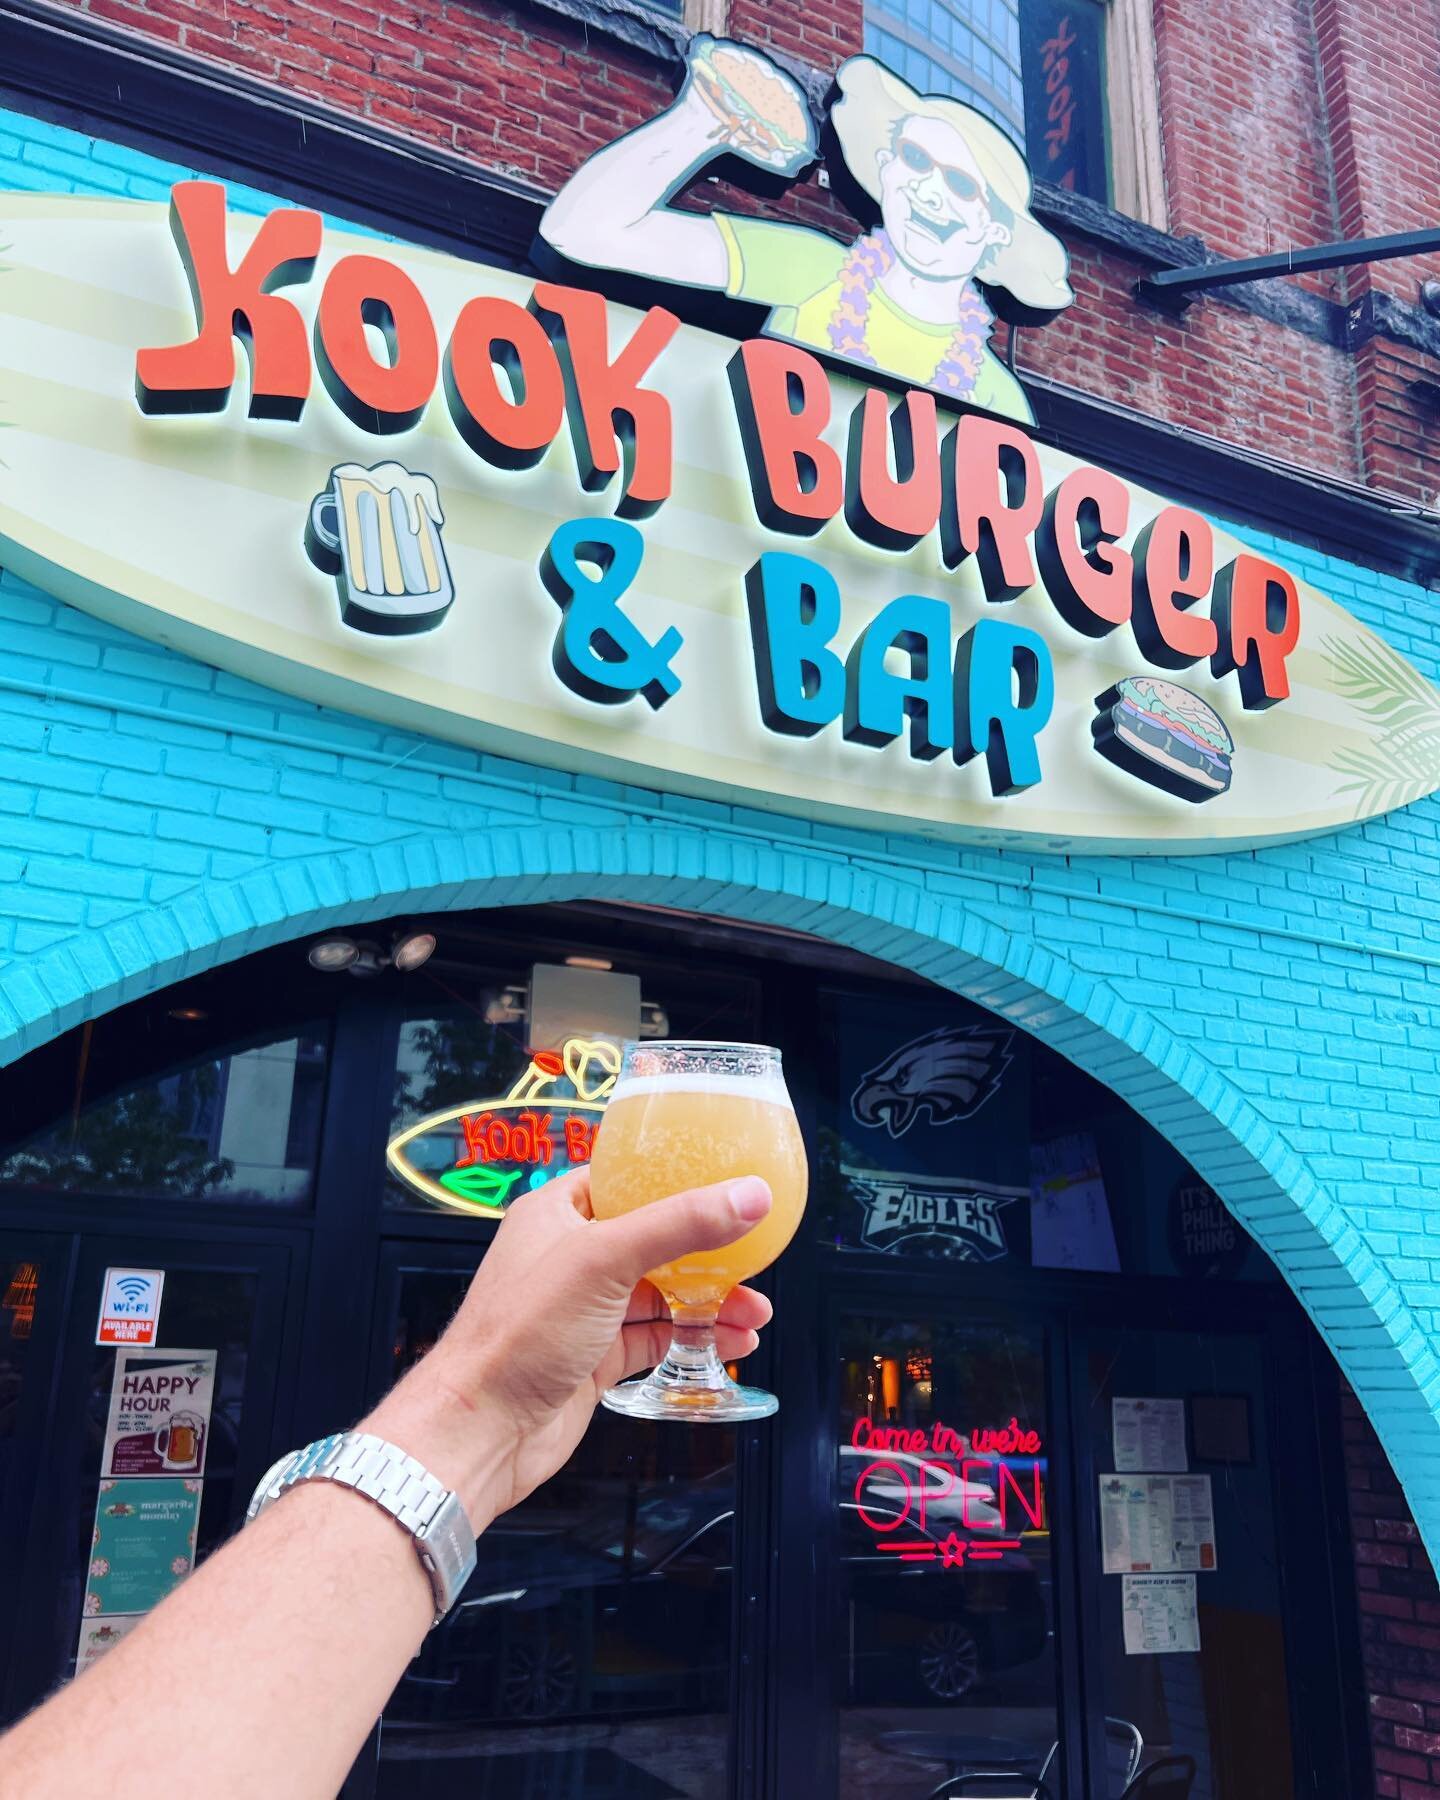 Cheers! 🍻 Join us at Kook Burger &amp; Bar for an Unforgettable Craft Beer Experience. Indulge in the Finest Selections, including @otherhalfphilly @wissahickonbrewingcompany @three3sbrewing @evilgeniusbeer and Local Gems. 🌟 #CraftBeerHeaven #Local